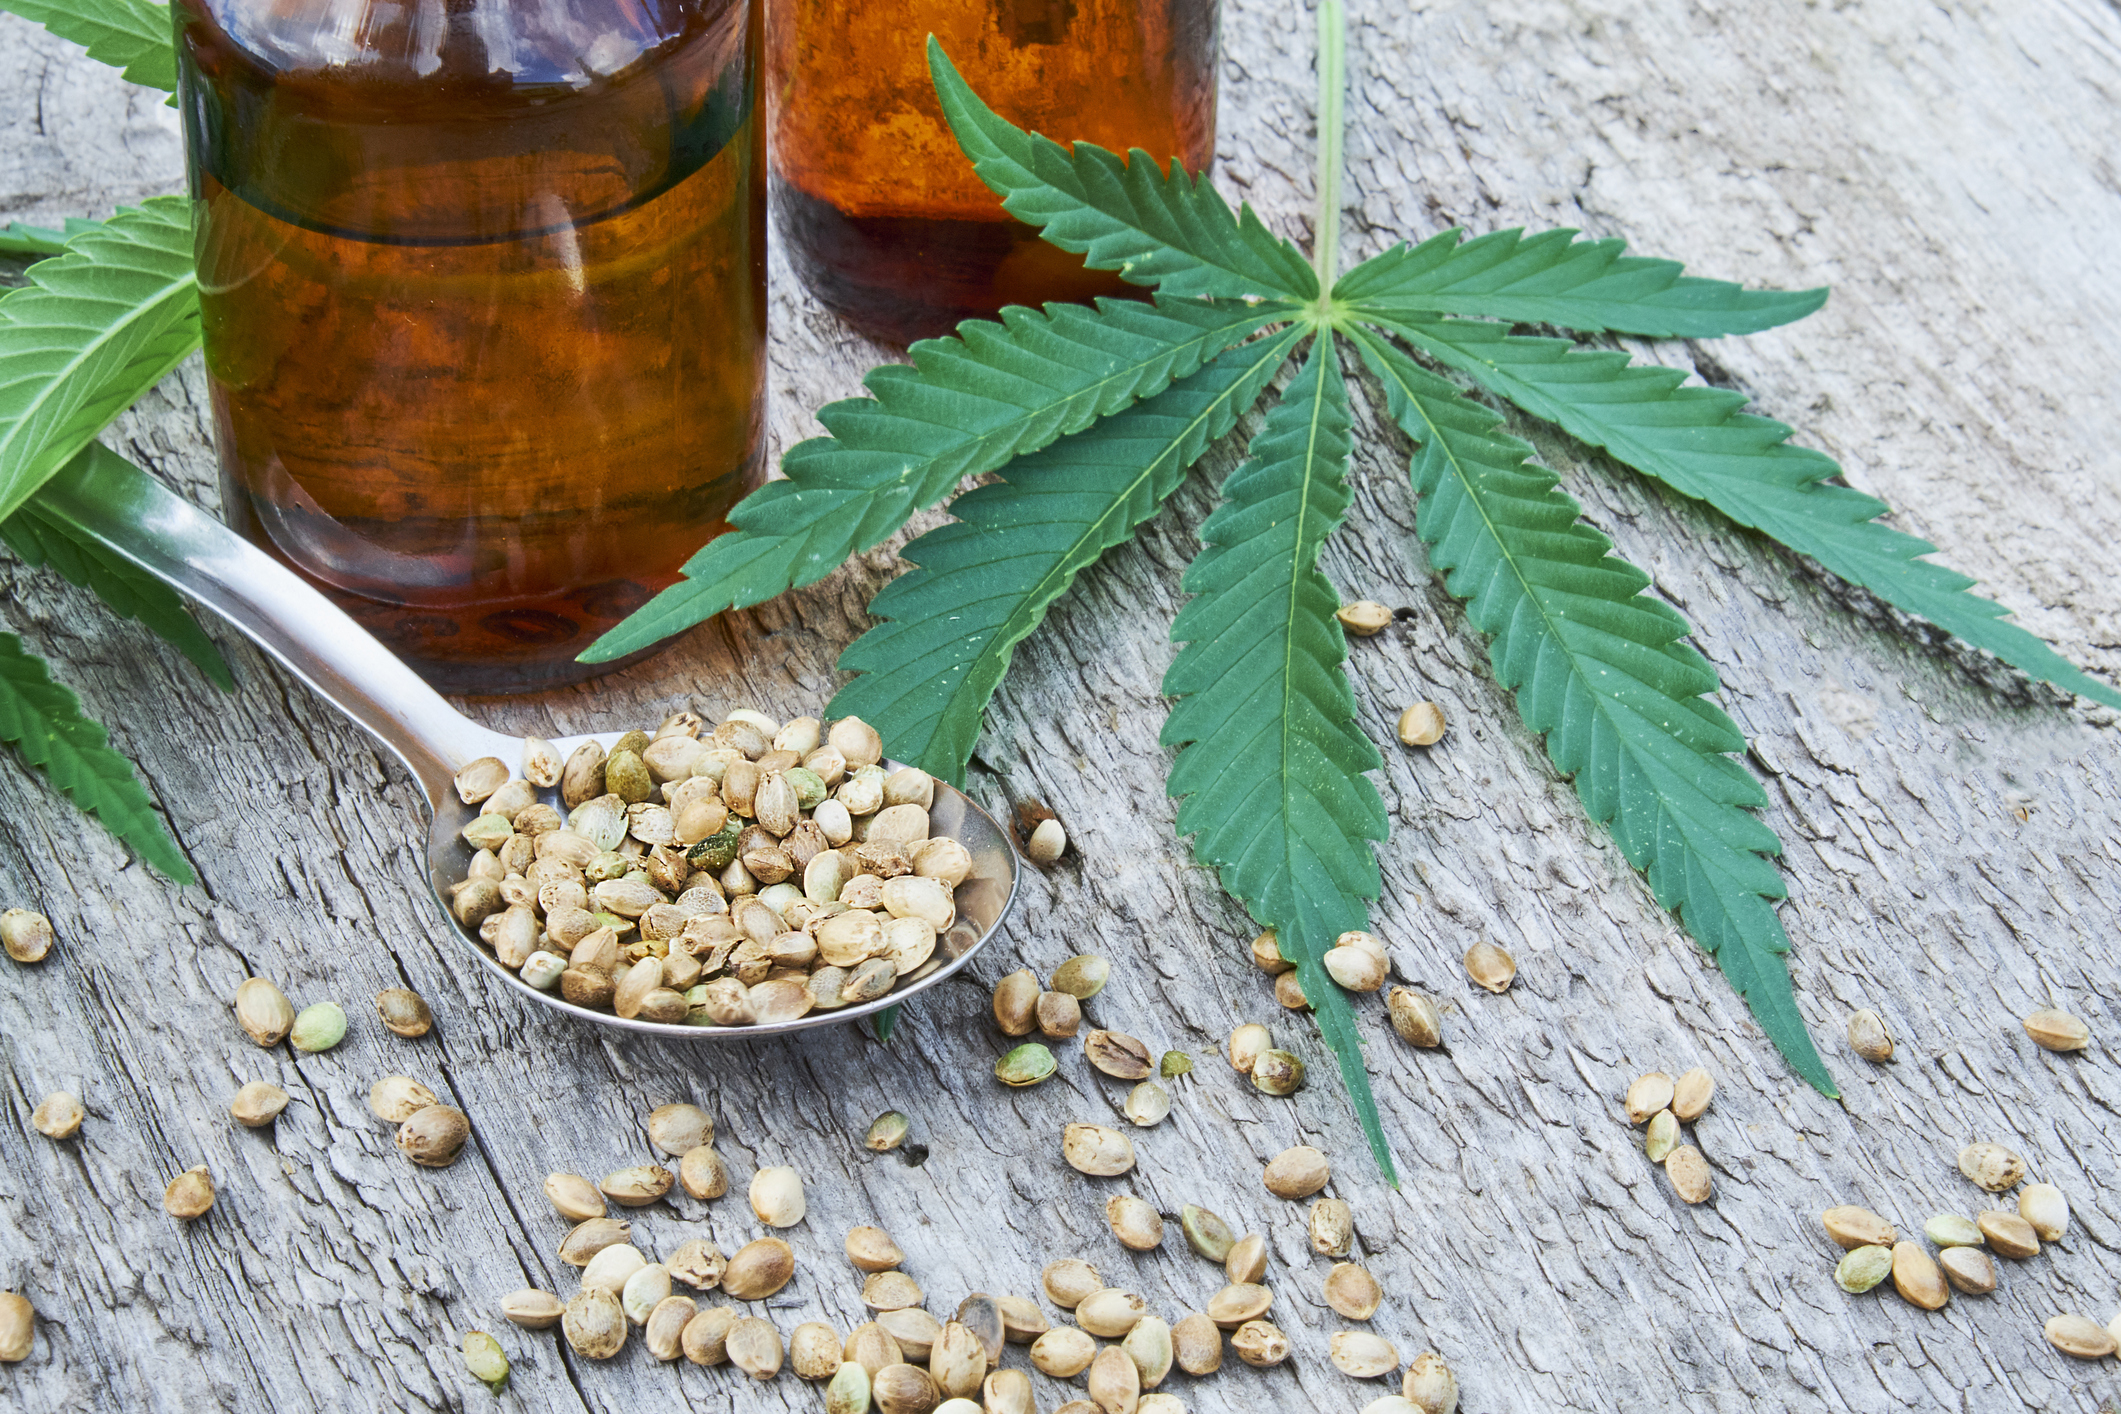 How Can CBD Help You Treat Depression